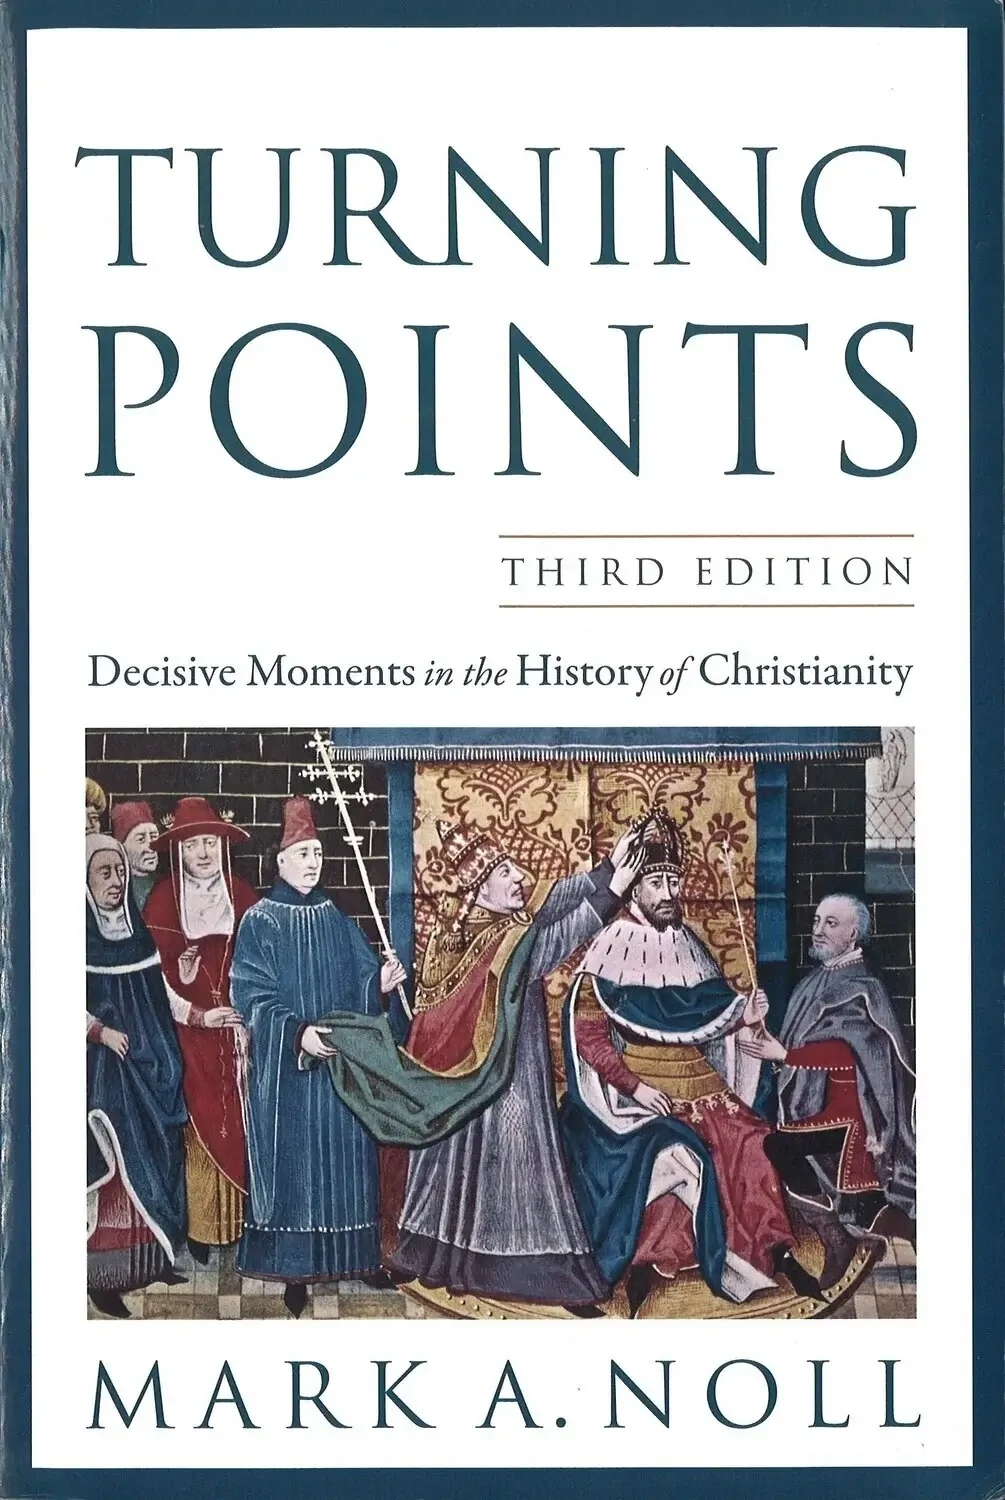 Turning Points - 3rd Edition, Mark A. Noll